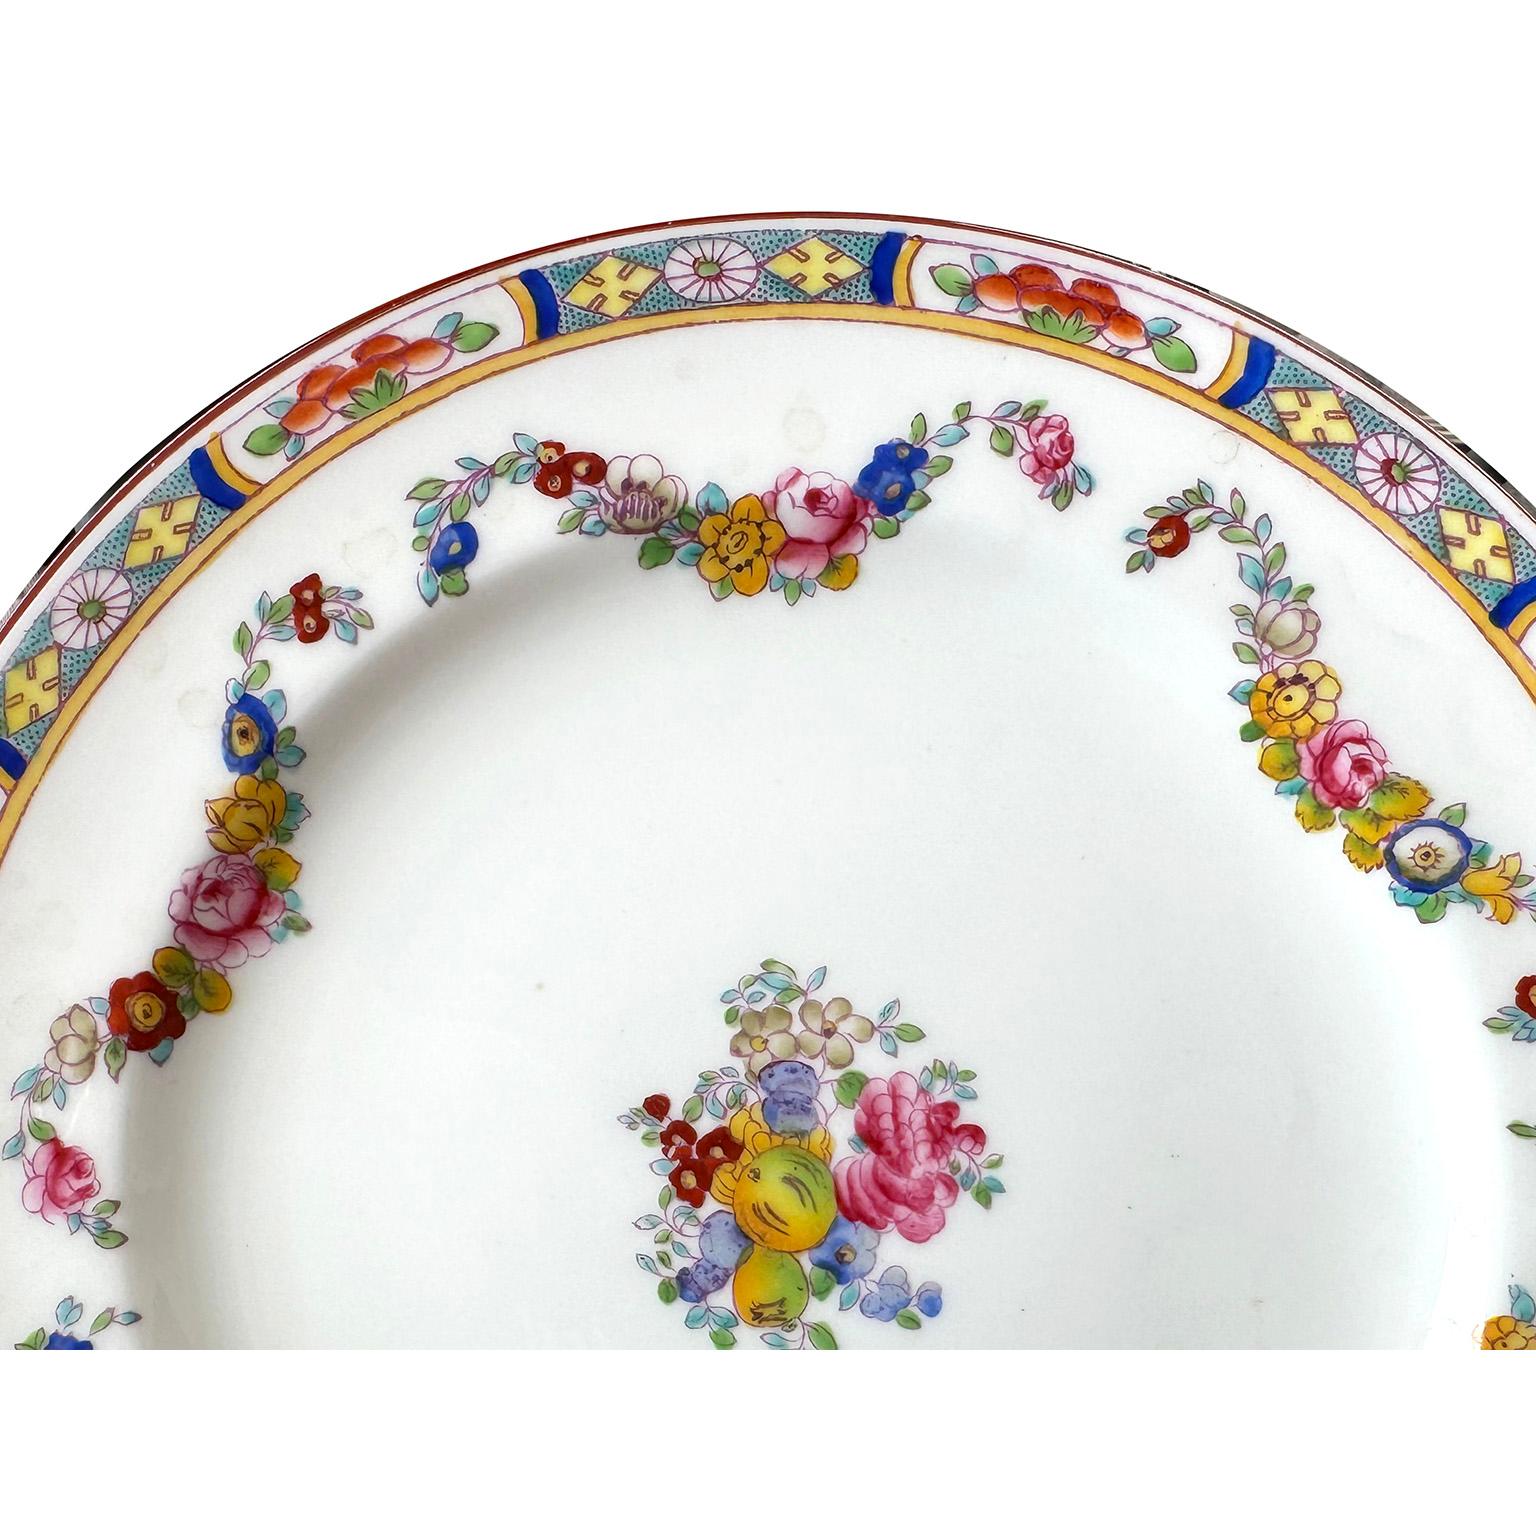 A Set of 30 English Hand-Decorated Minton Fine China Dessert Plates. The beautifully vibrant color hand painted dessert plates, each with a colorful floral design, an intricate trim and swaged floral strands, centered with a floral bouquet. All